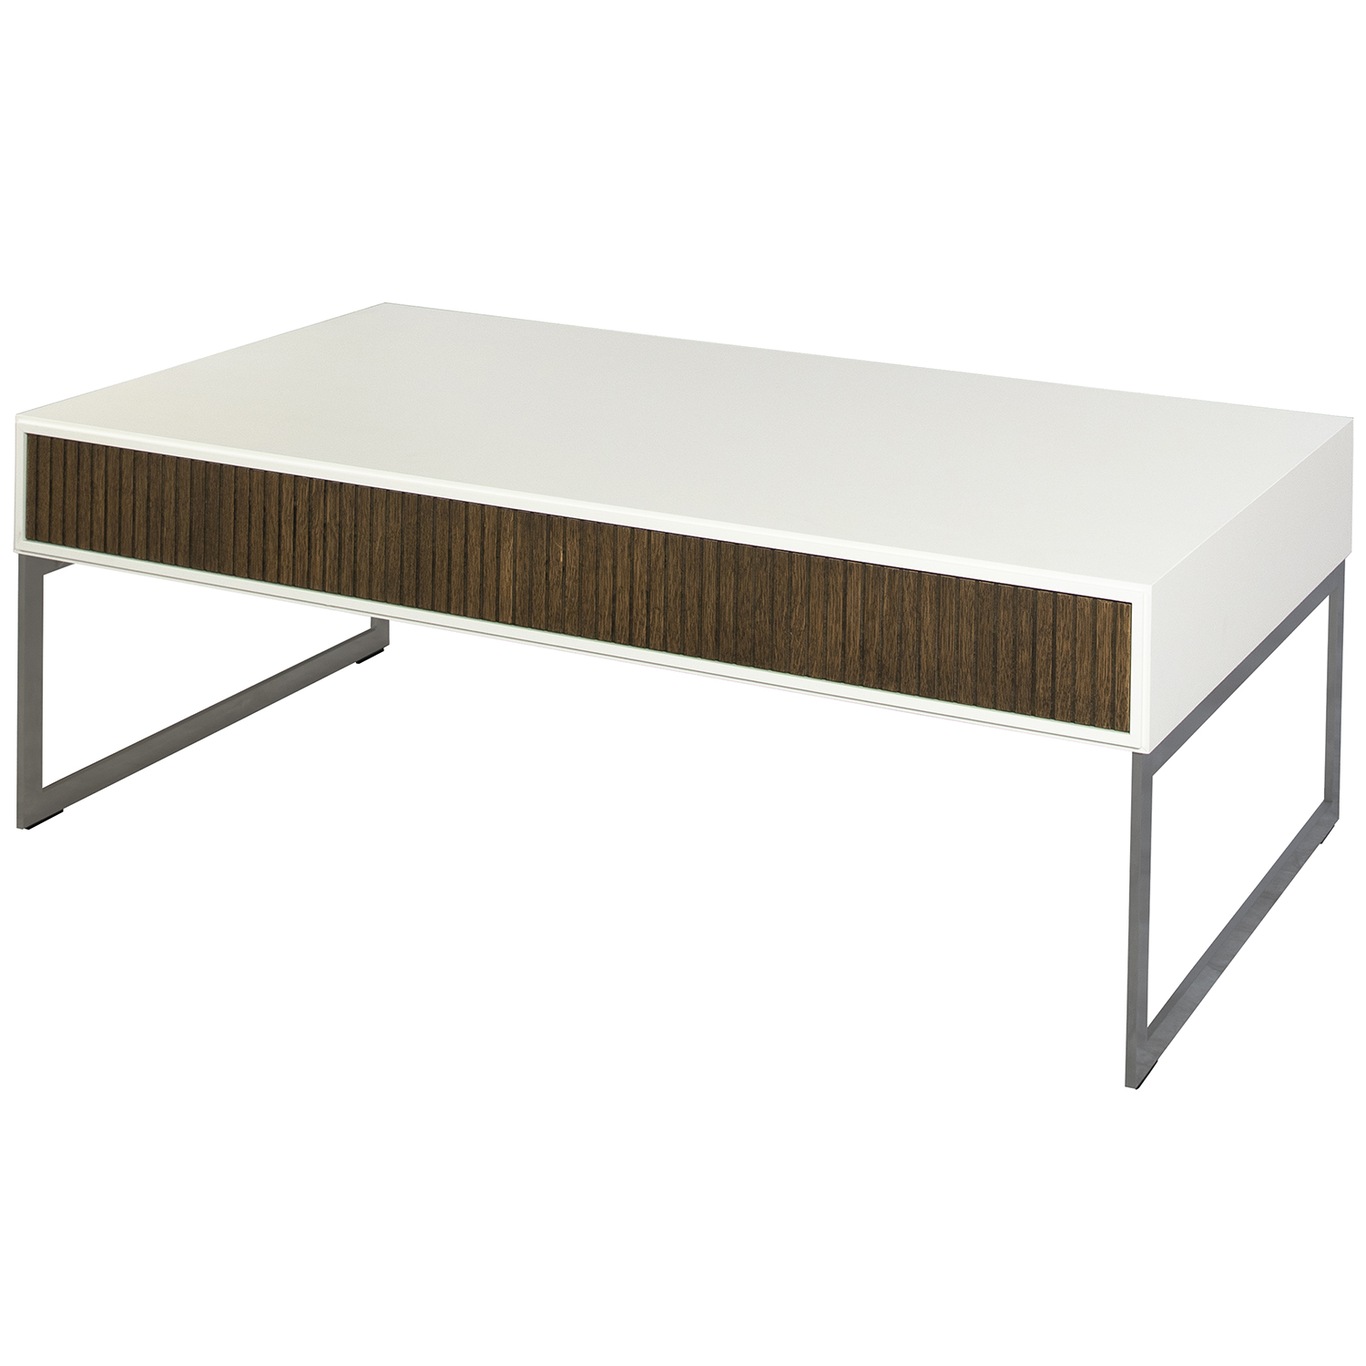 Line Burned Walnut Coffee Table 70x130 cm, White / Dark Stained